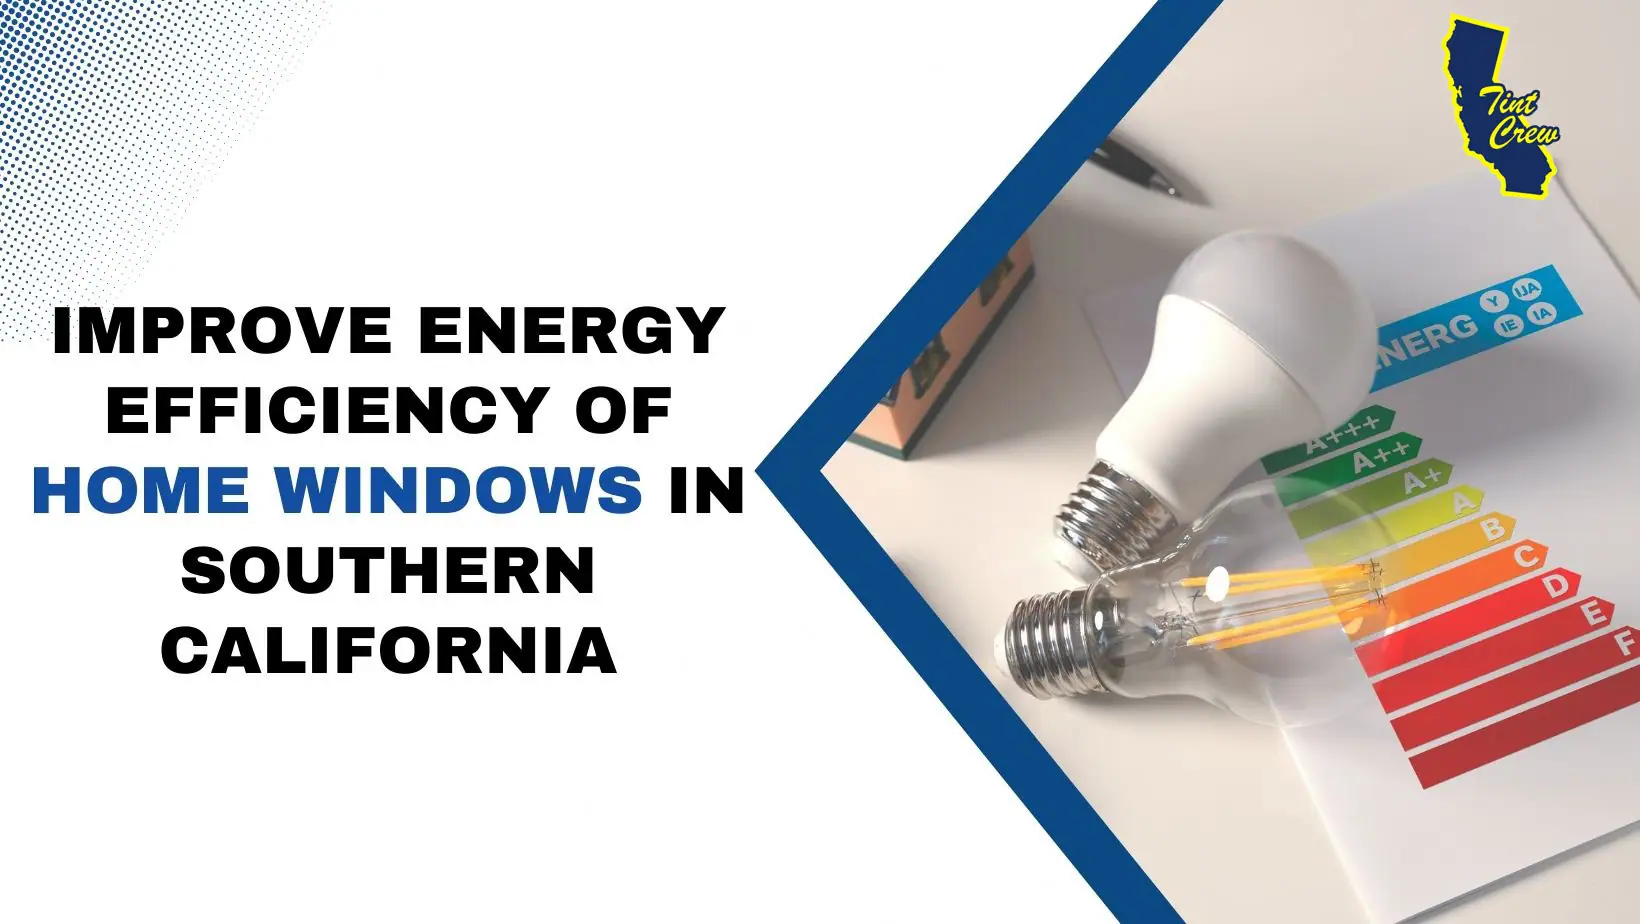 Improve Energy Efficiency of Home Windows in Southern California